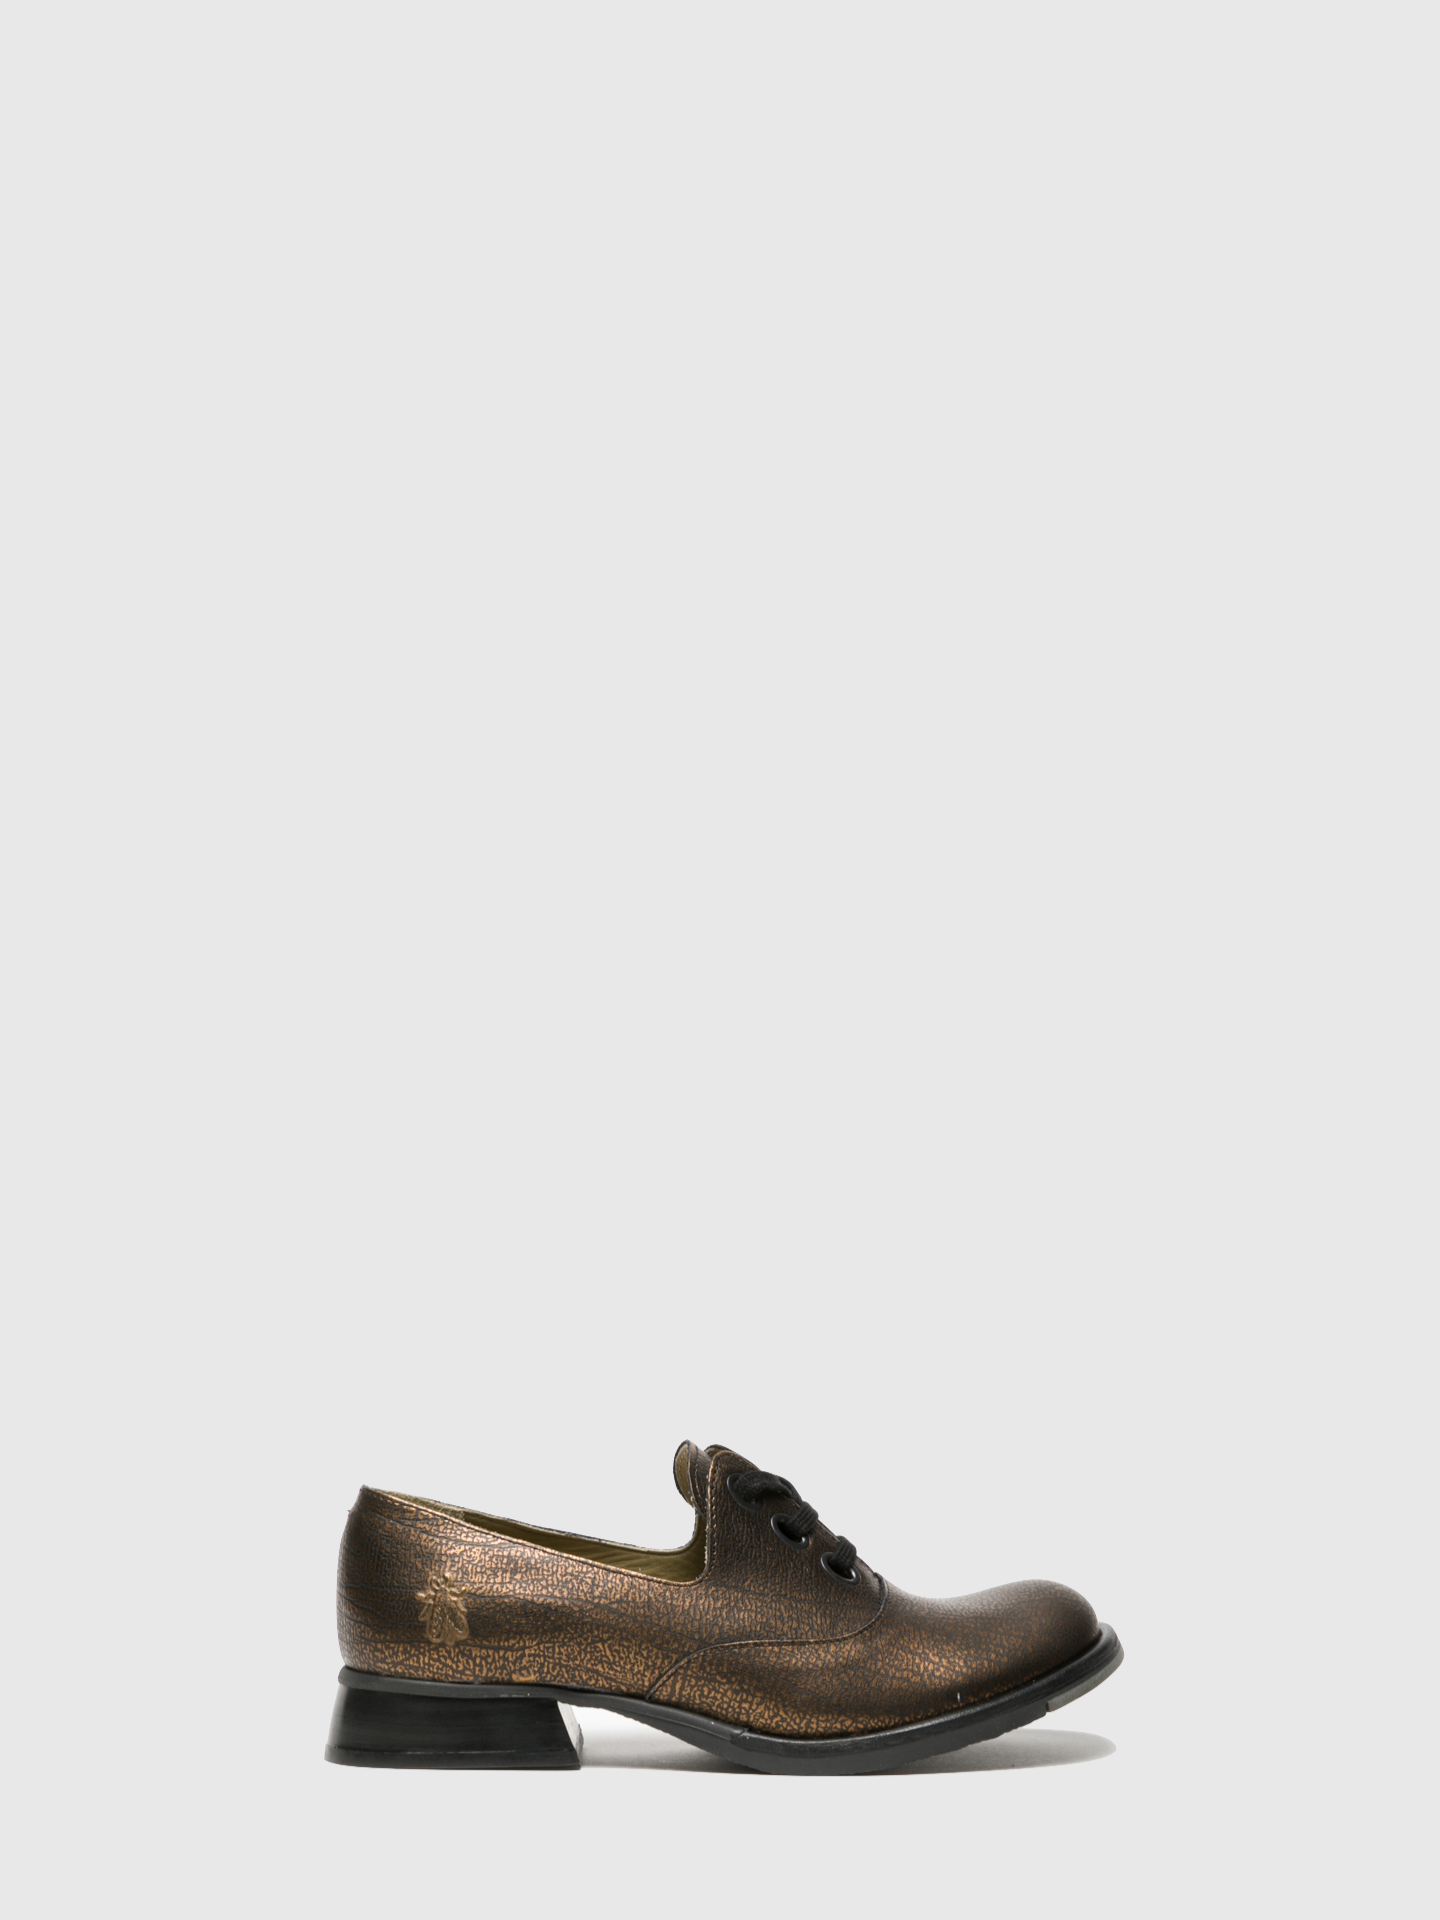 Fly London SandyBrown Oxford Shoes